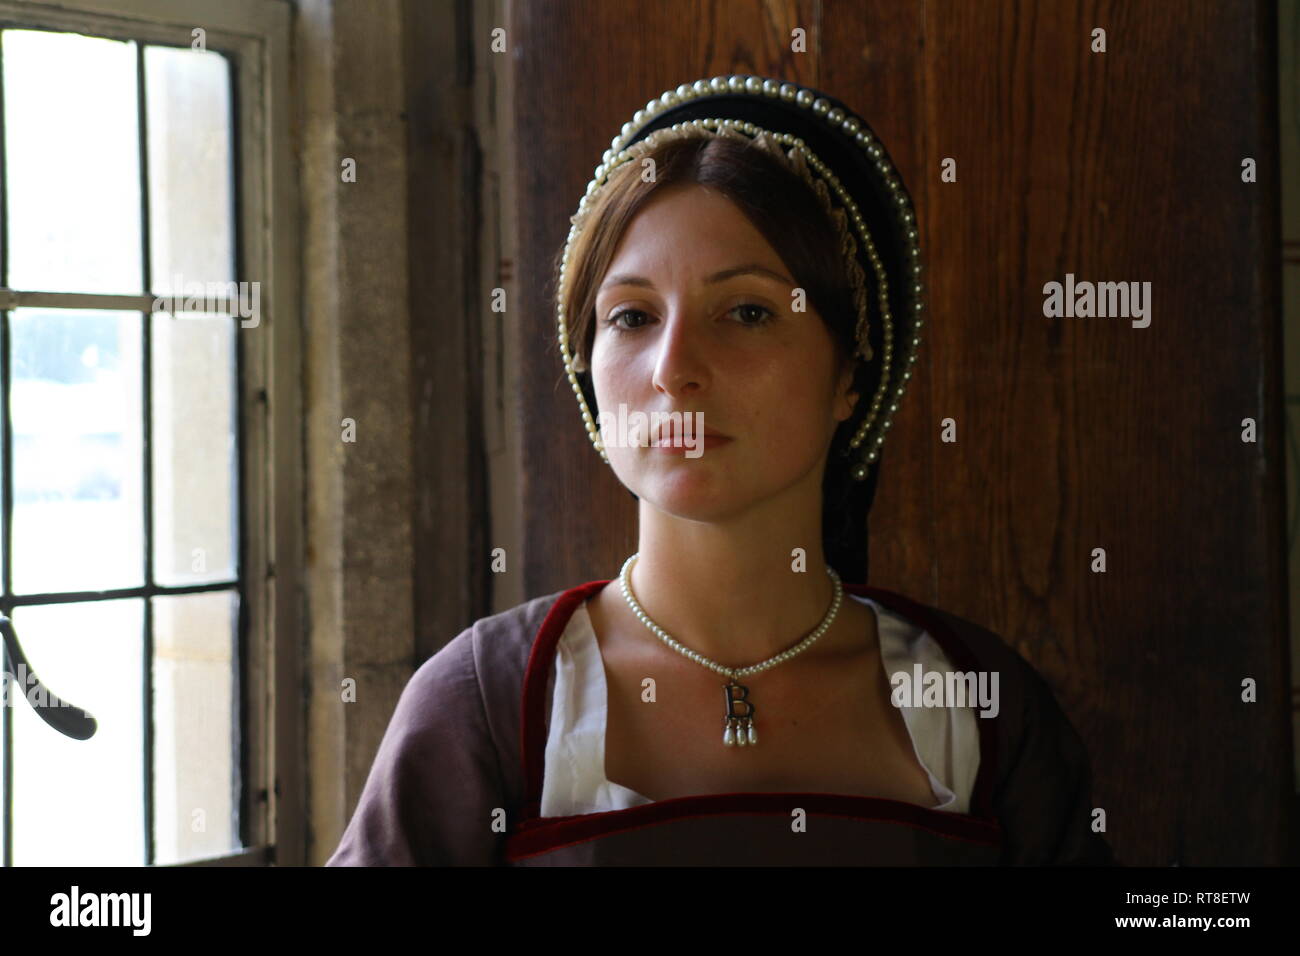 A beautiful young Woman dressed as Anne Boleyn sits by a window at the Tower of London and looks thoughtful. Stock Photo